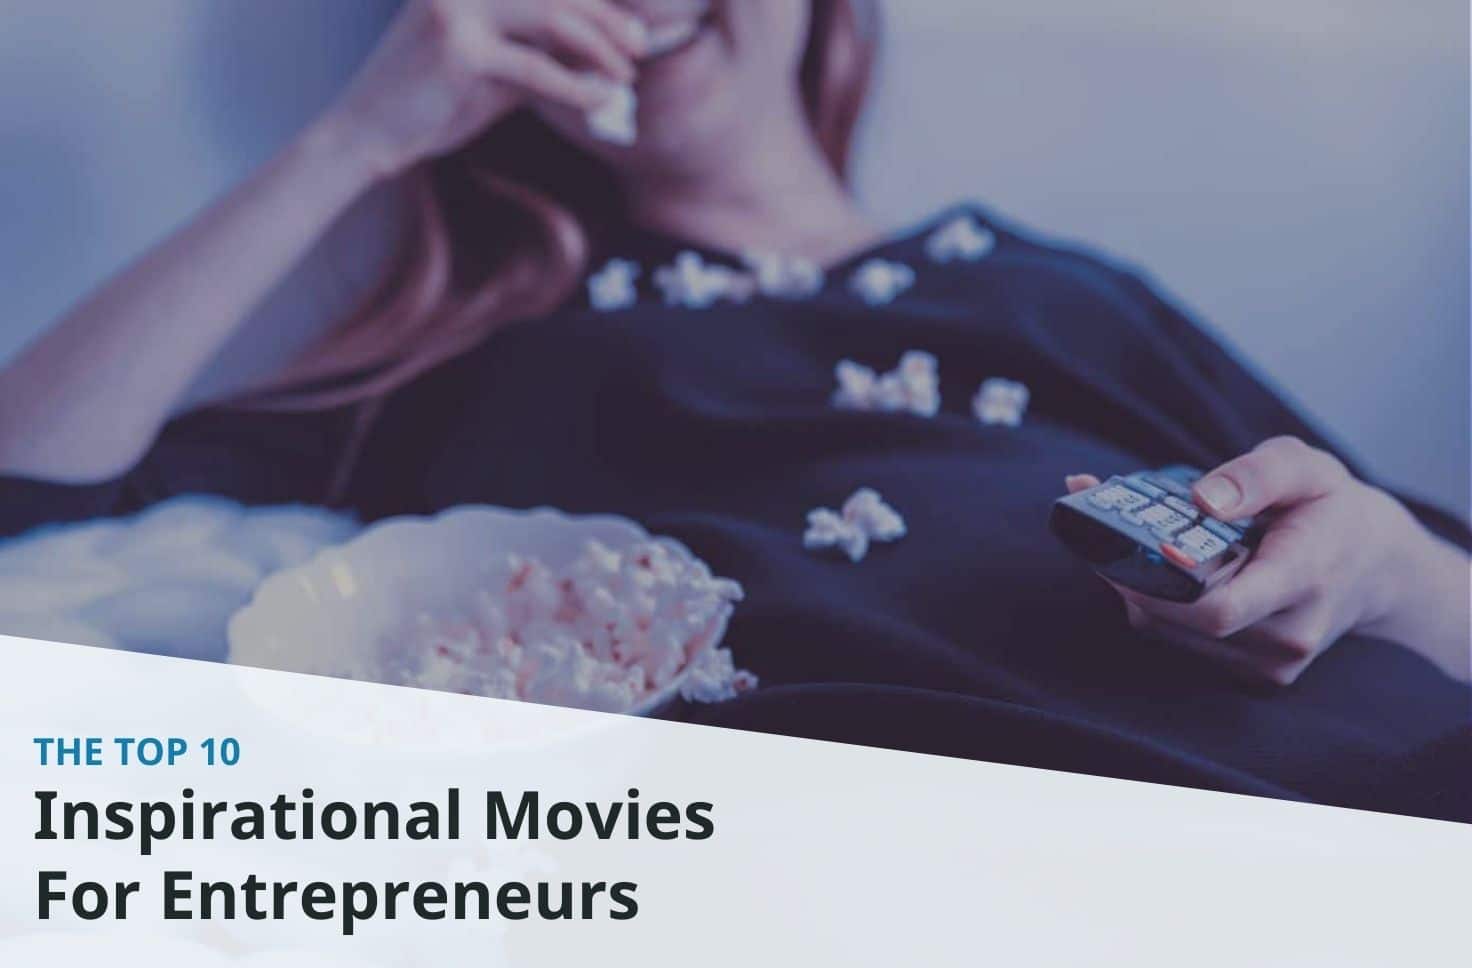 Top 10 business movies and inspiring movies for entrepreneurs